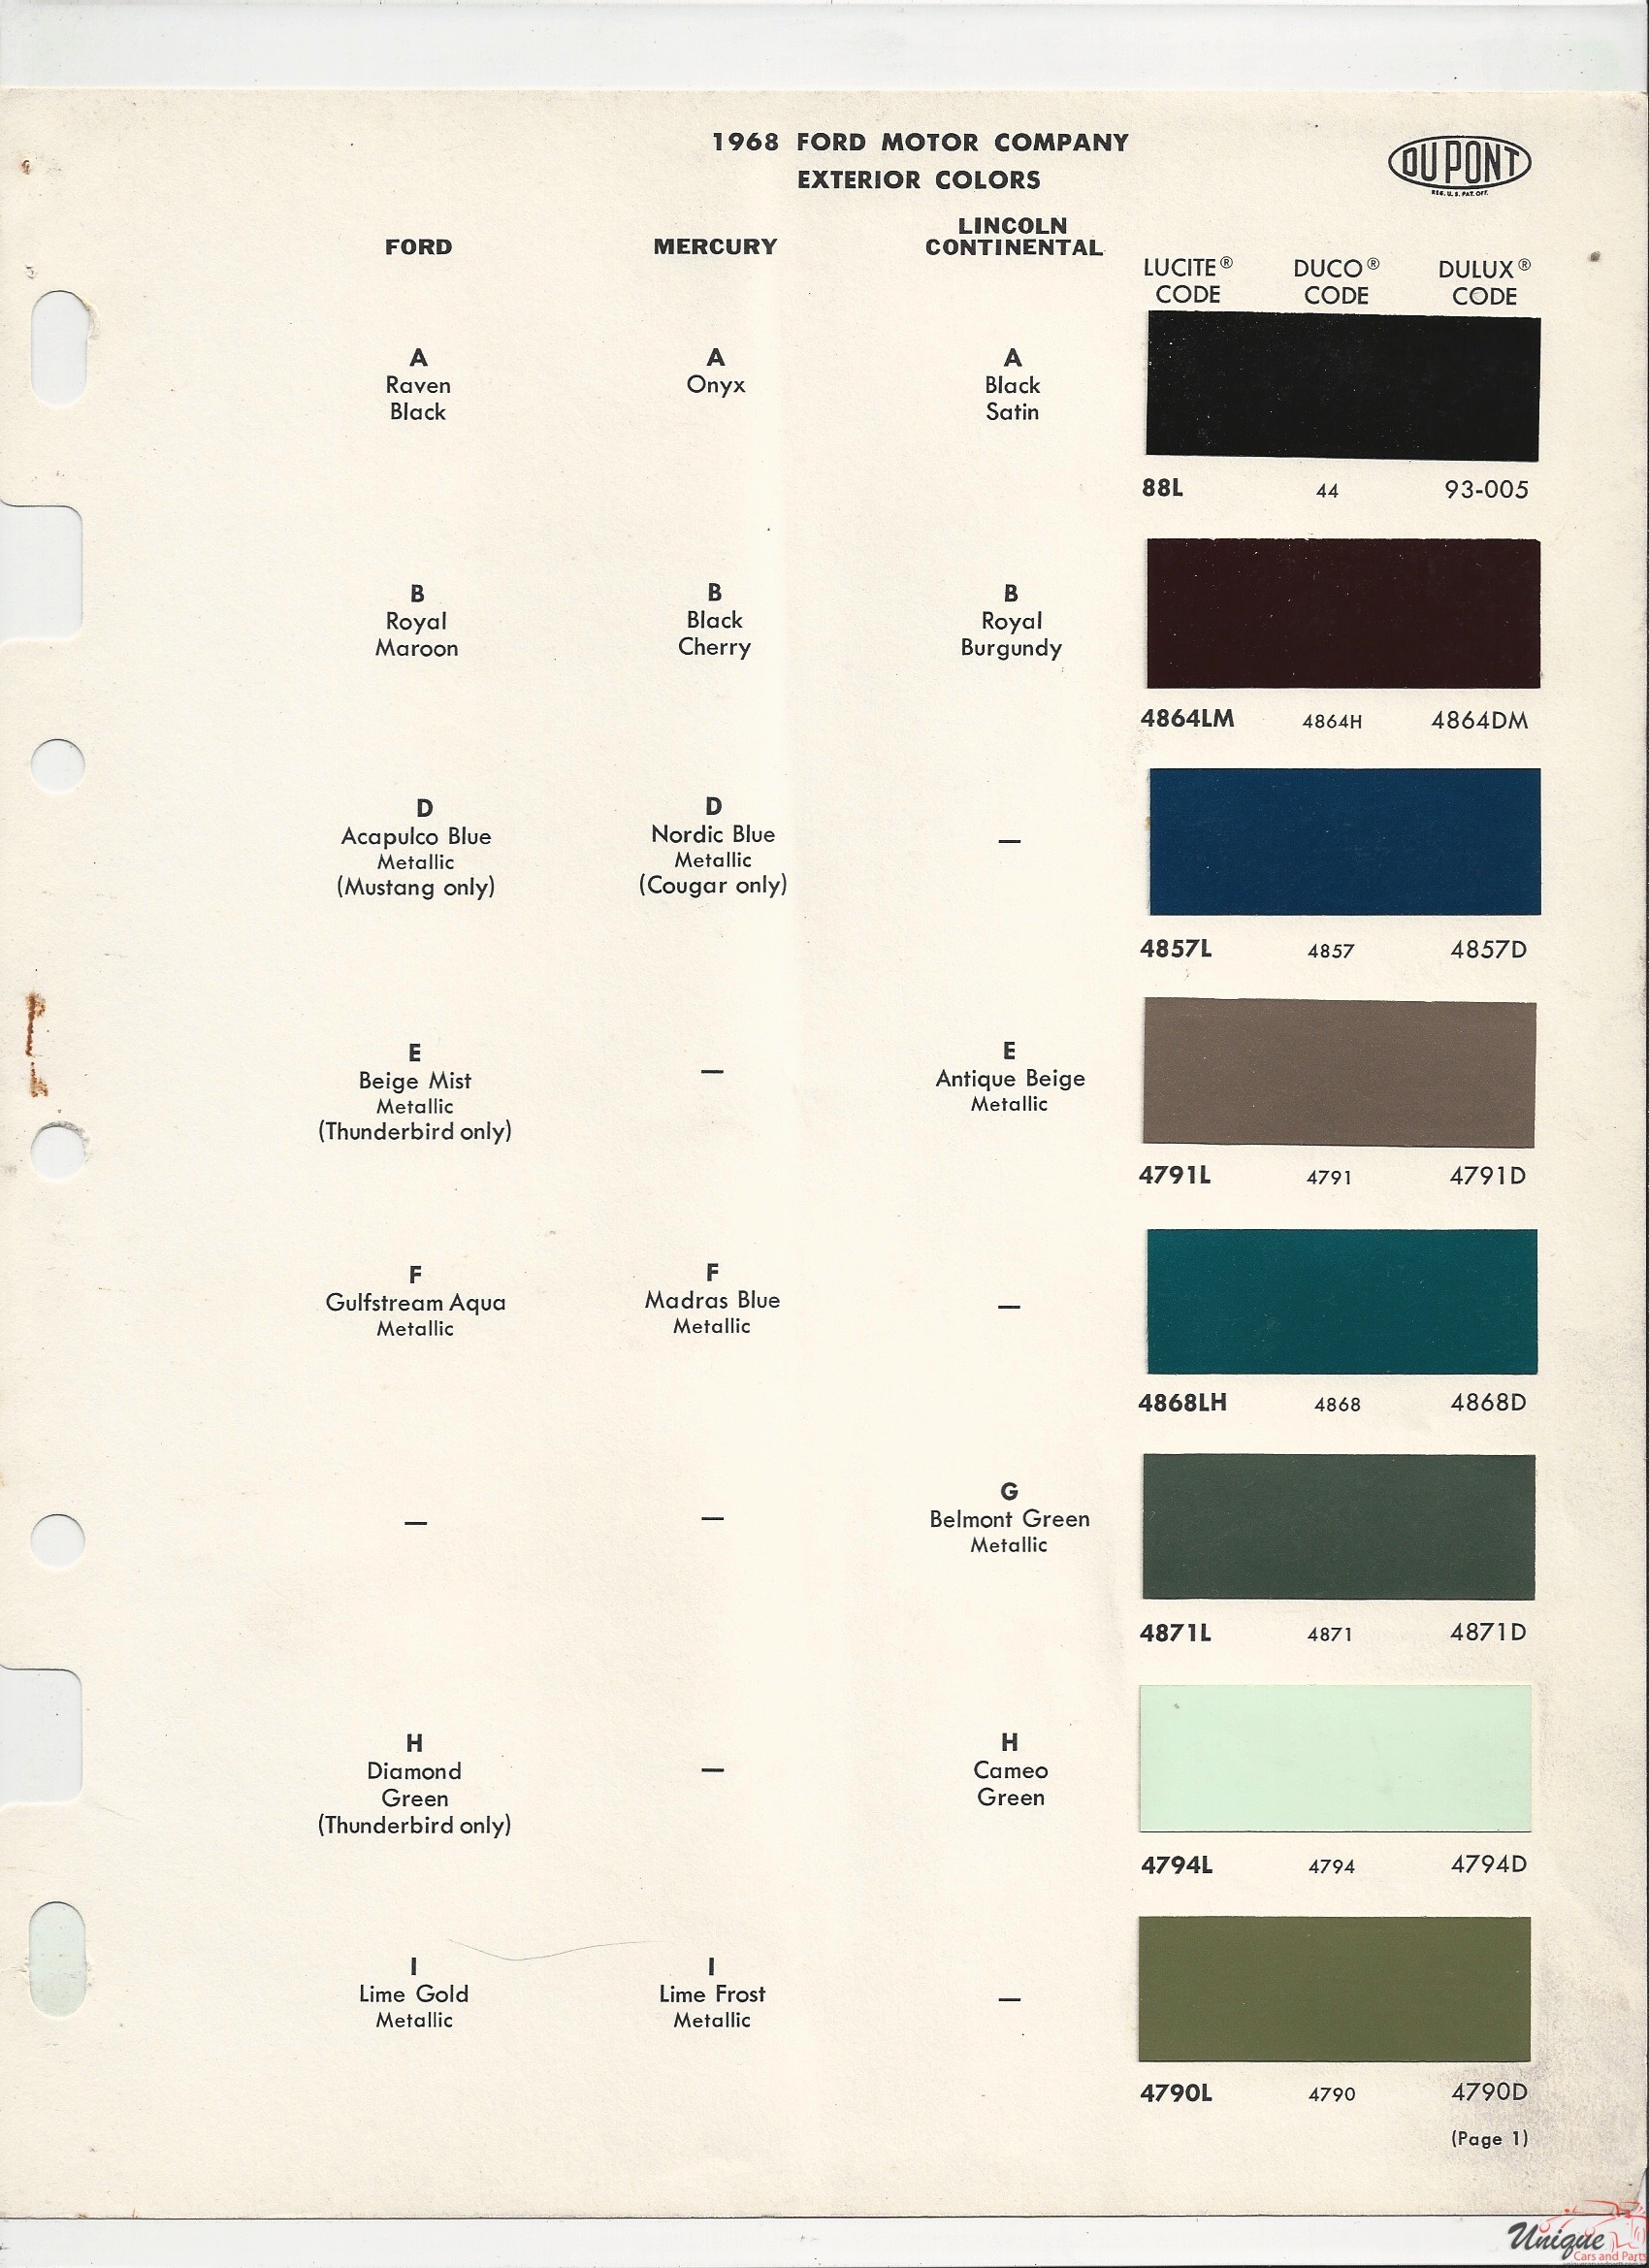 1968 Ford Paint Charts